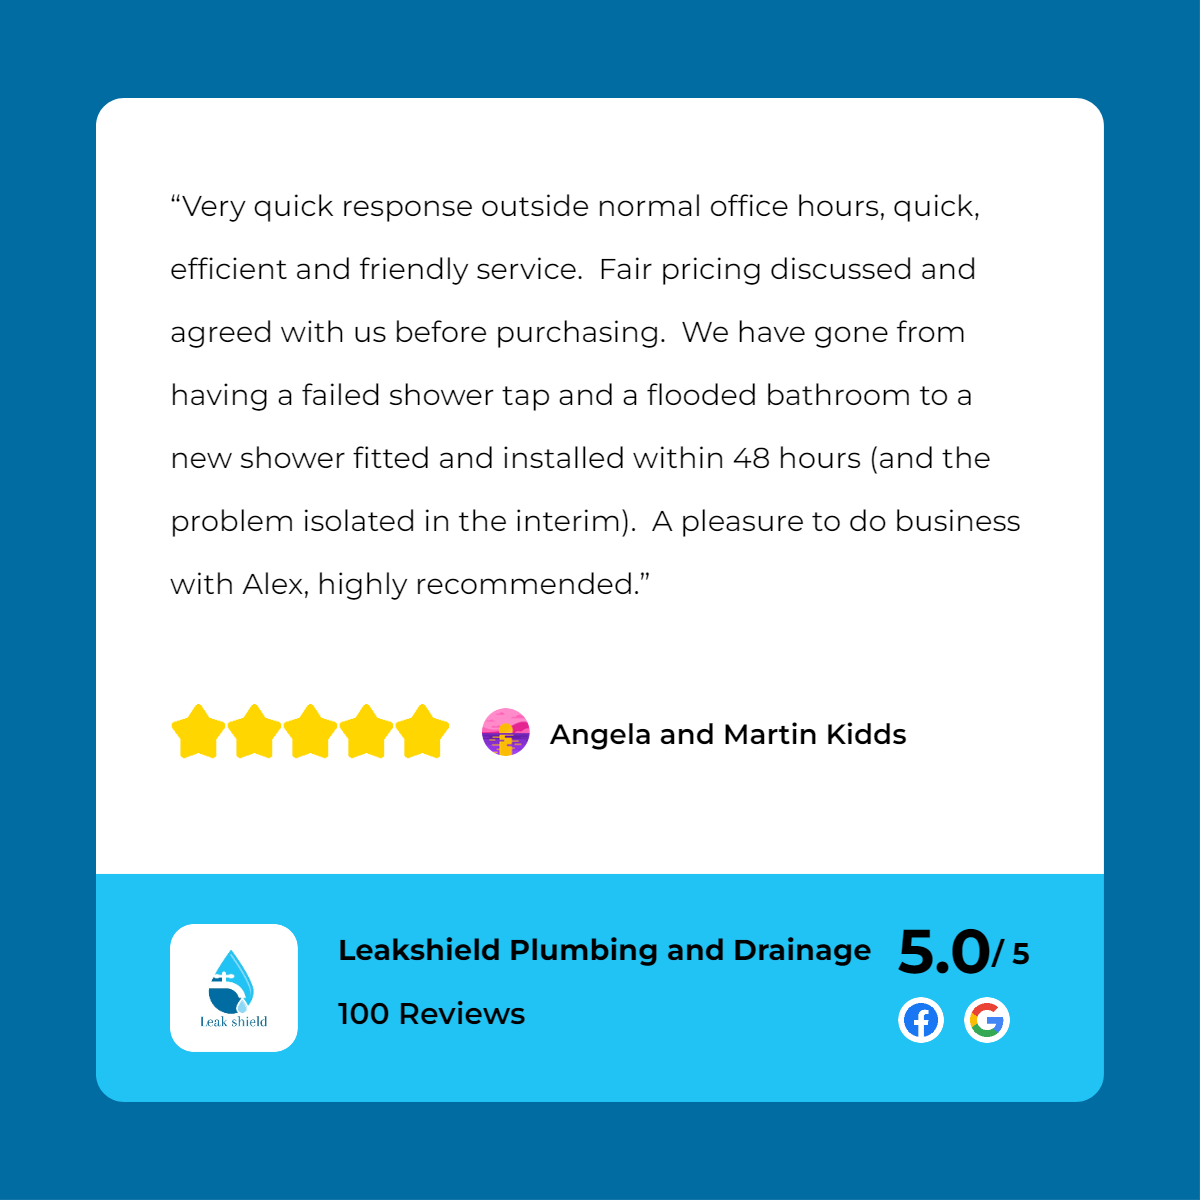 A customer review for a plumbing company with a five star rating.